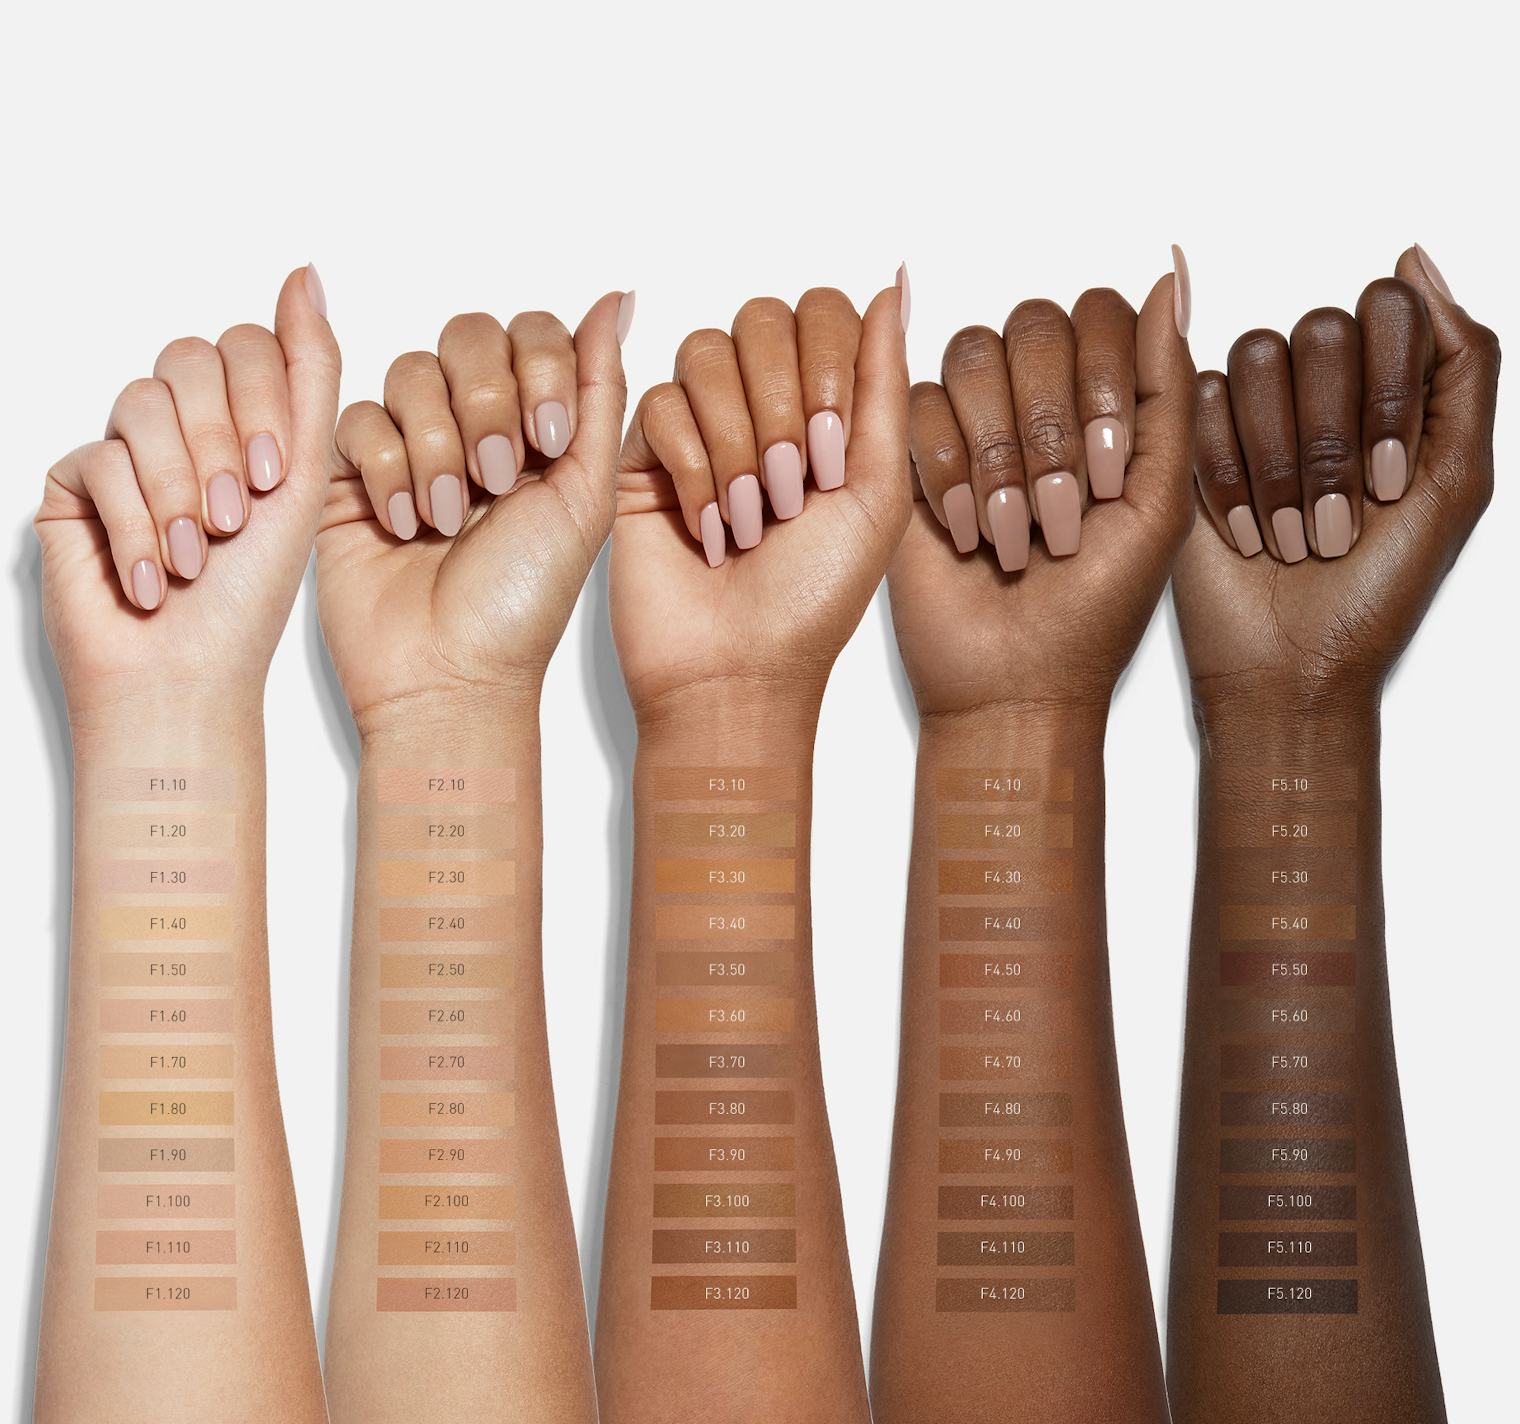 Where To Buy Morphe Fluidity In The Uk Because With 60 Shades There Should Be A Shade For You